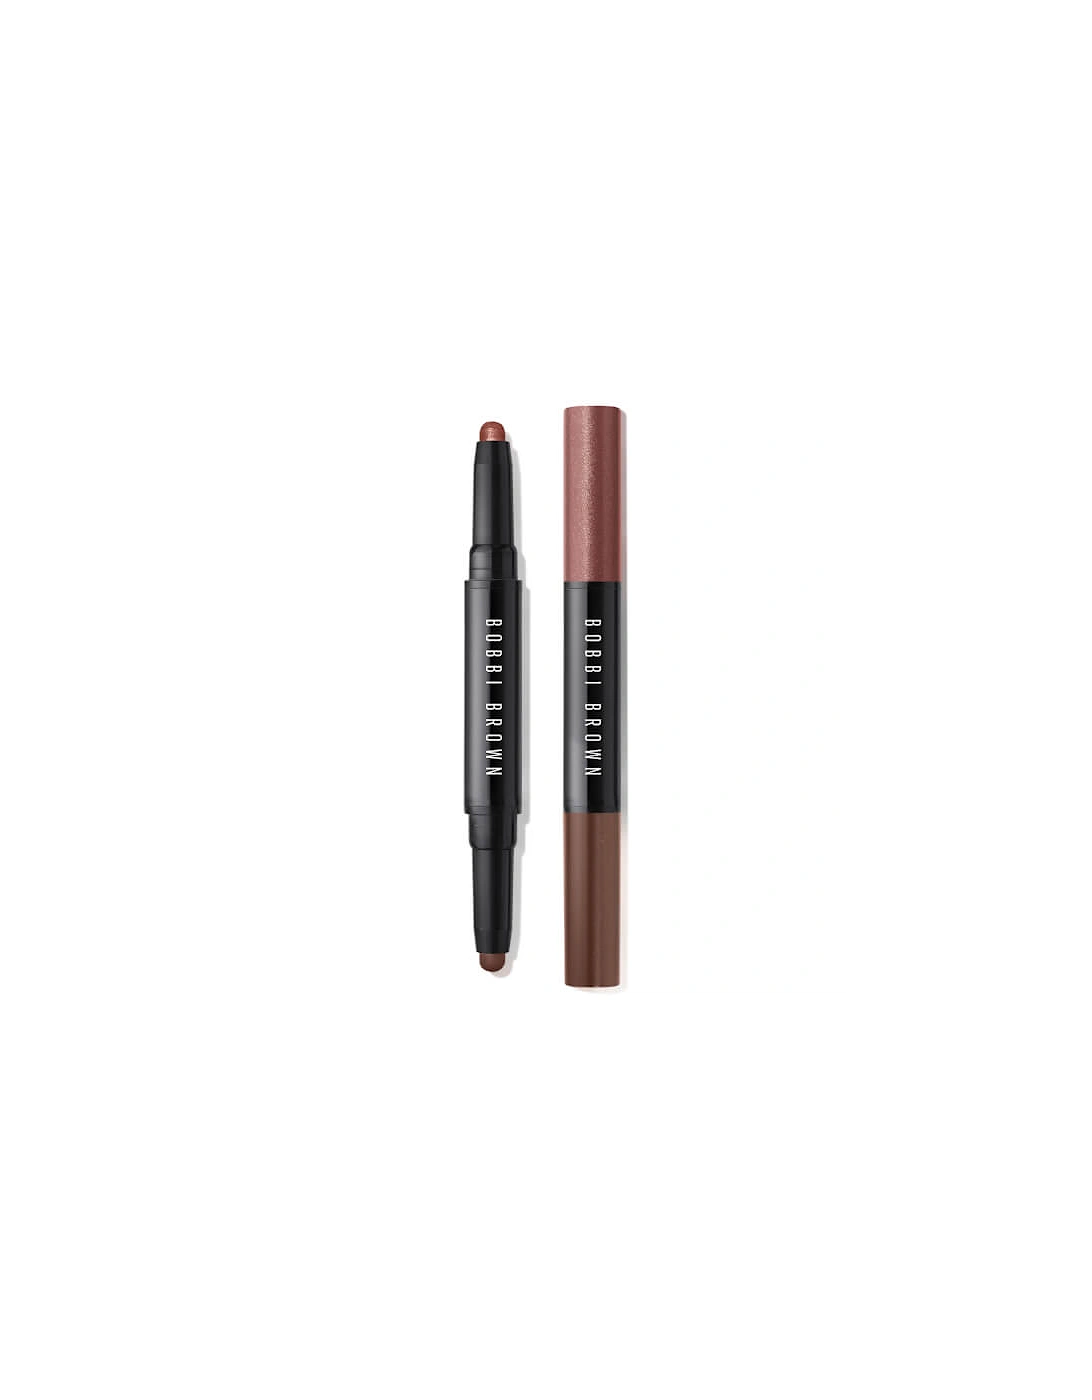 Long-Wear Cream Shadow Stick Duo - Rusted Pink / Cinnamon, 2 of 1